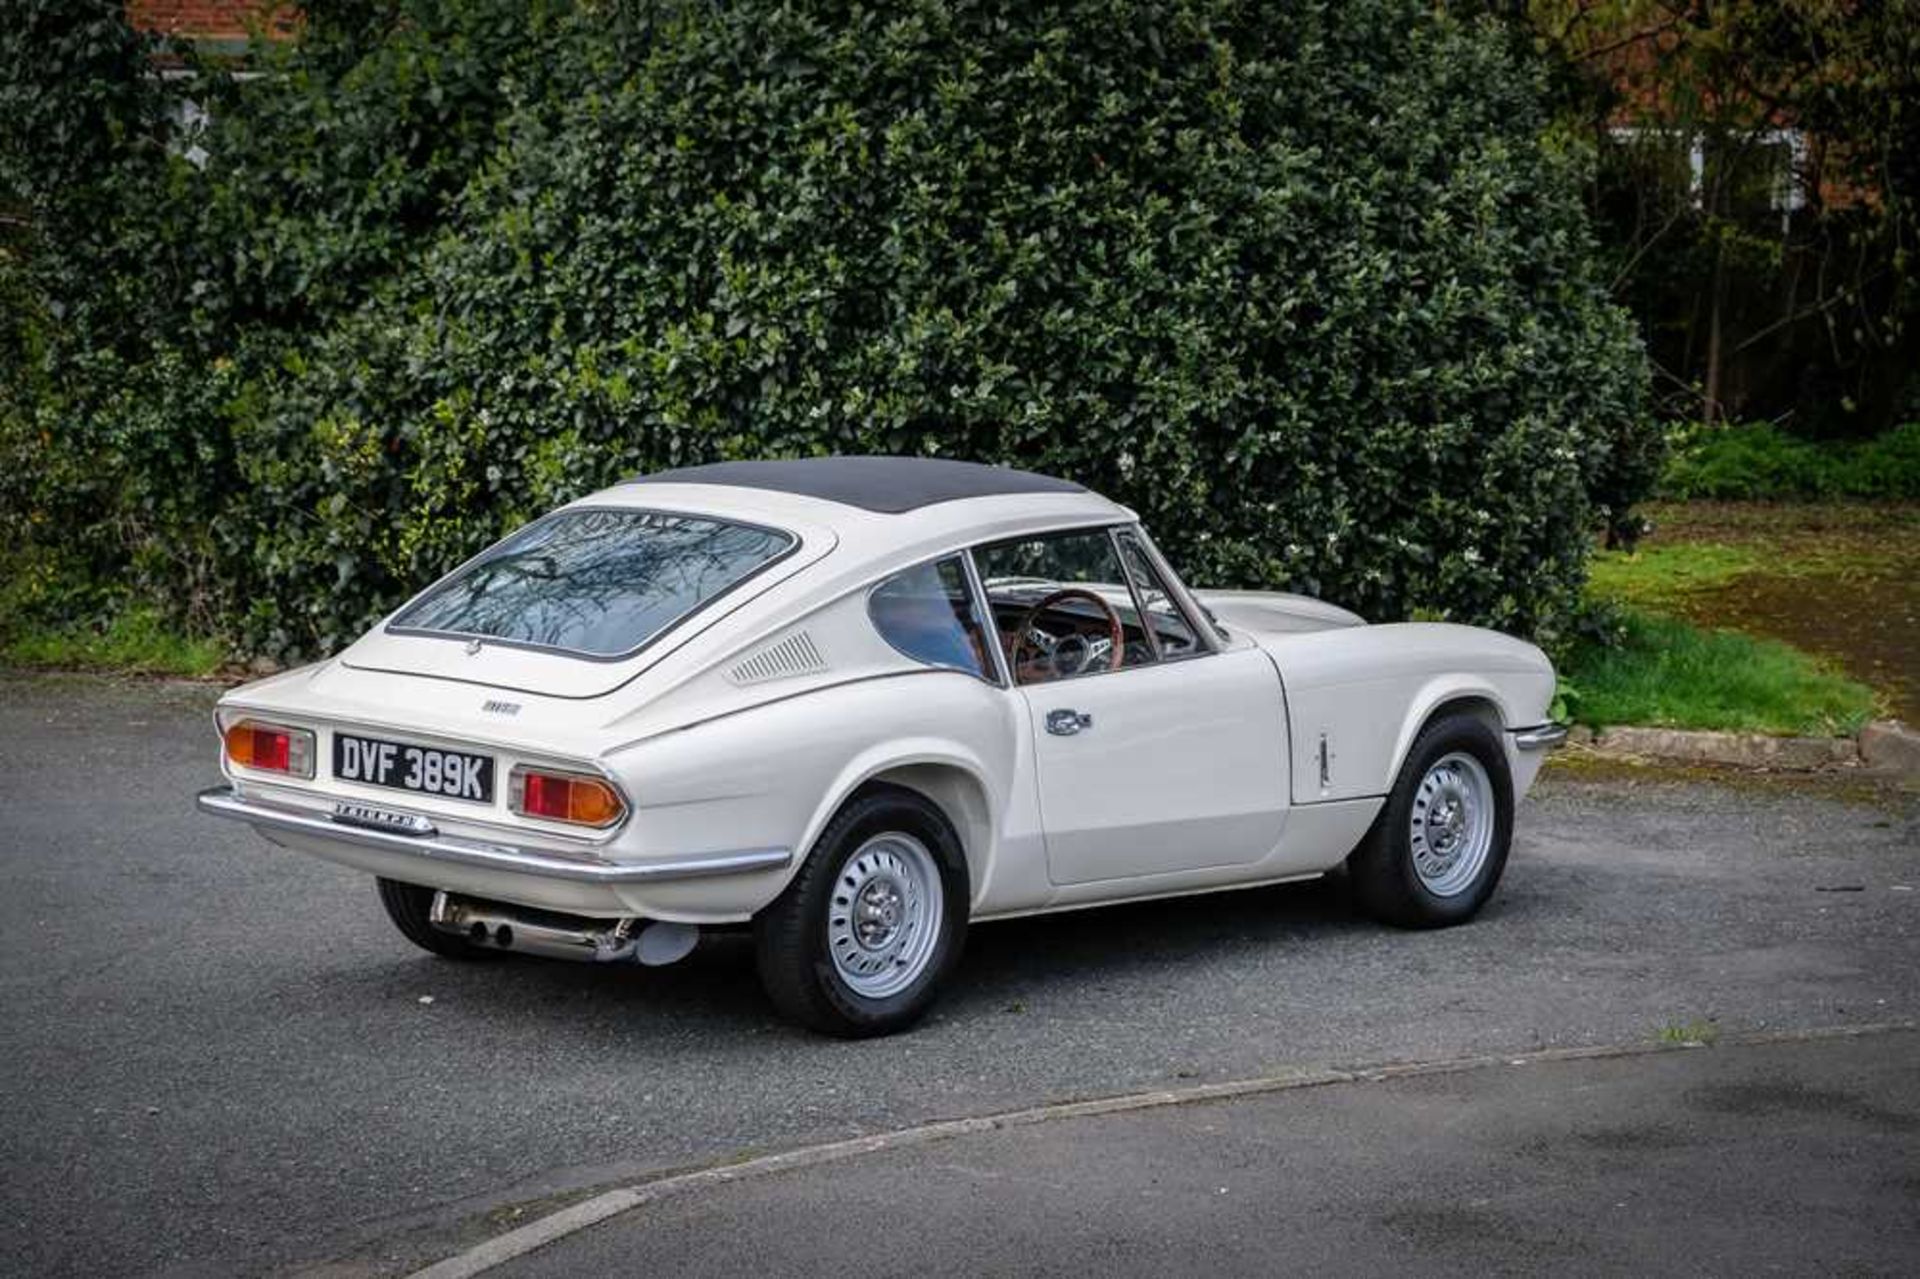 1971 Triumph GT6 MkIII Fresh from a full professional restoration - Image 23 of 106